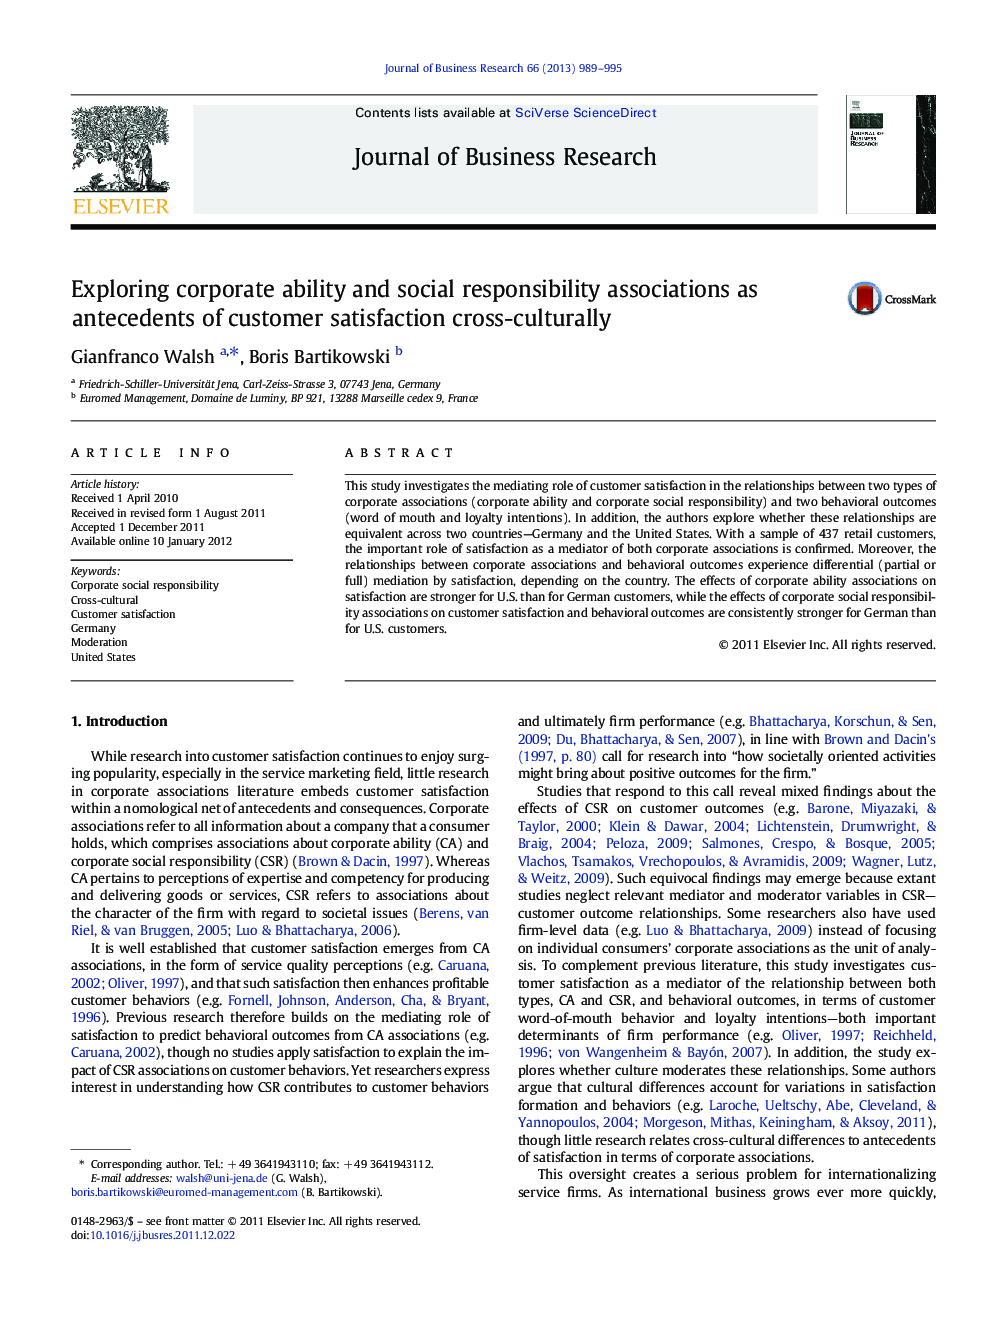 Exploring corporate ability and social responsibility associations as antecedents of customer satisfaction cross-culturally